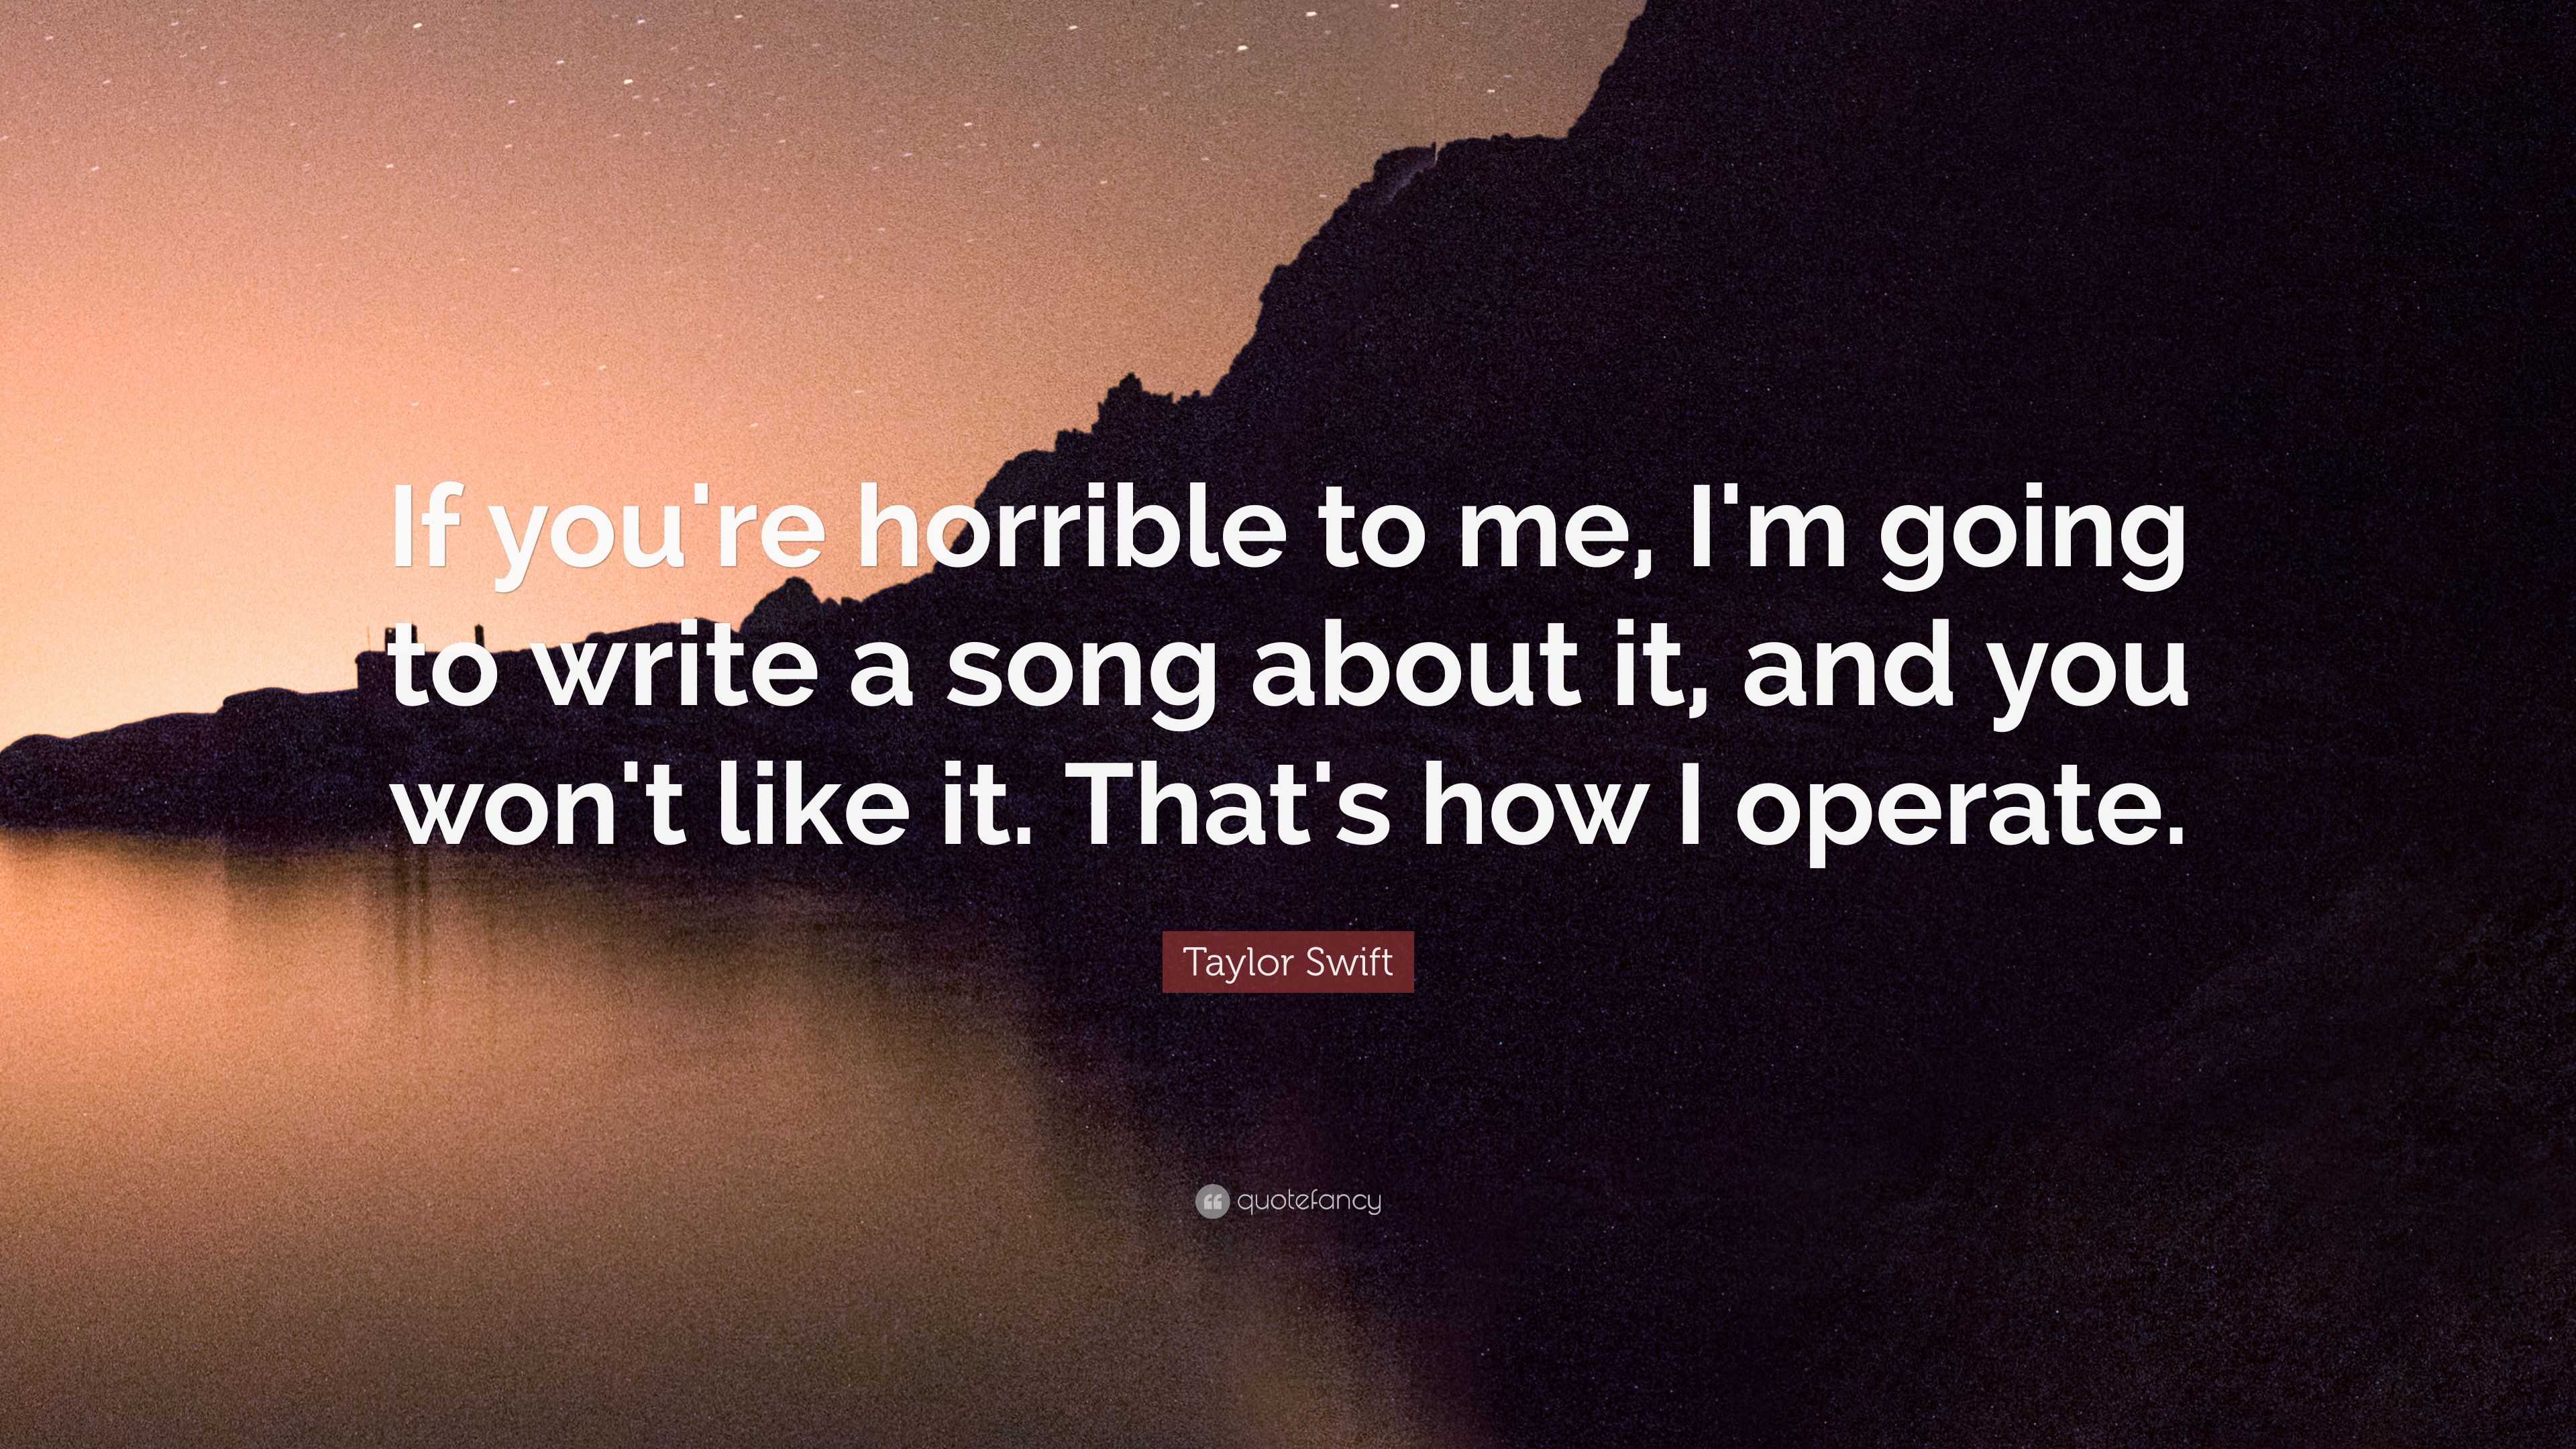 Taylor Swift Quote “If you re horrible to me I m